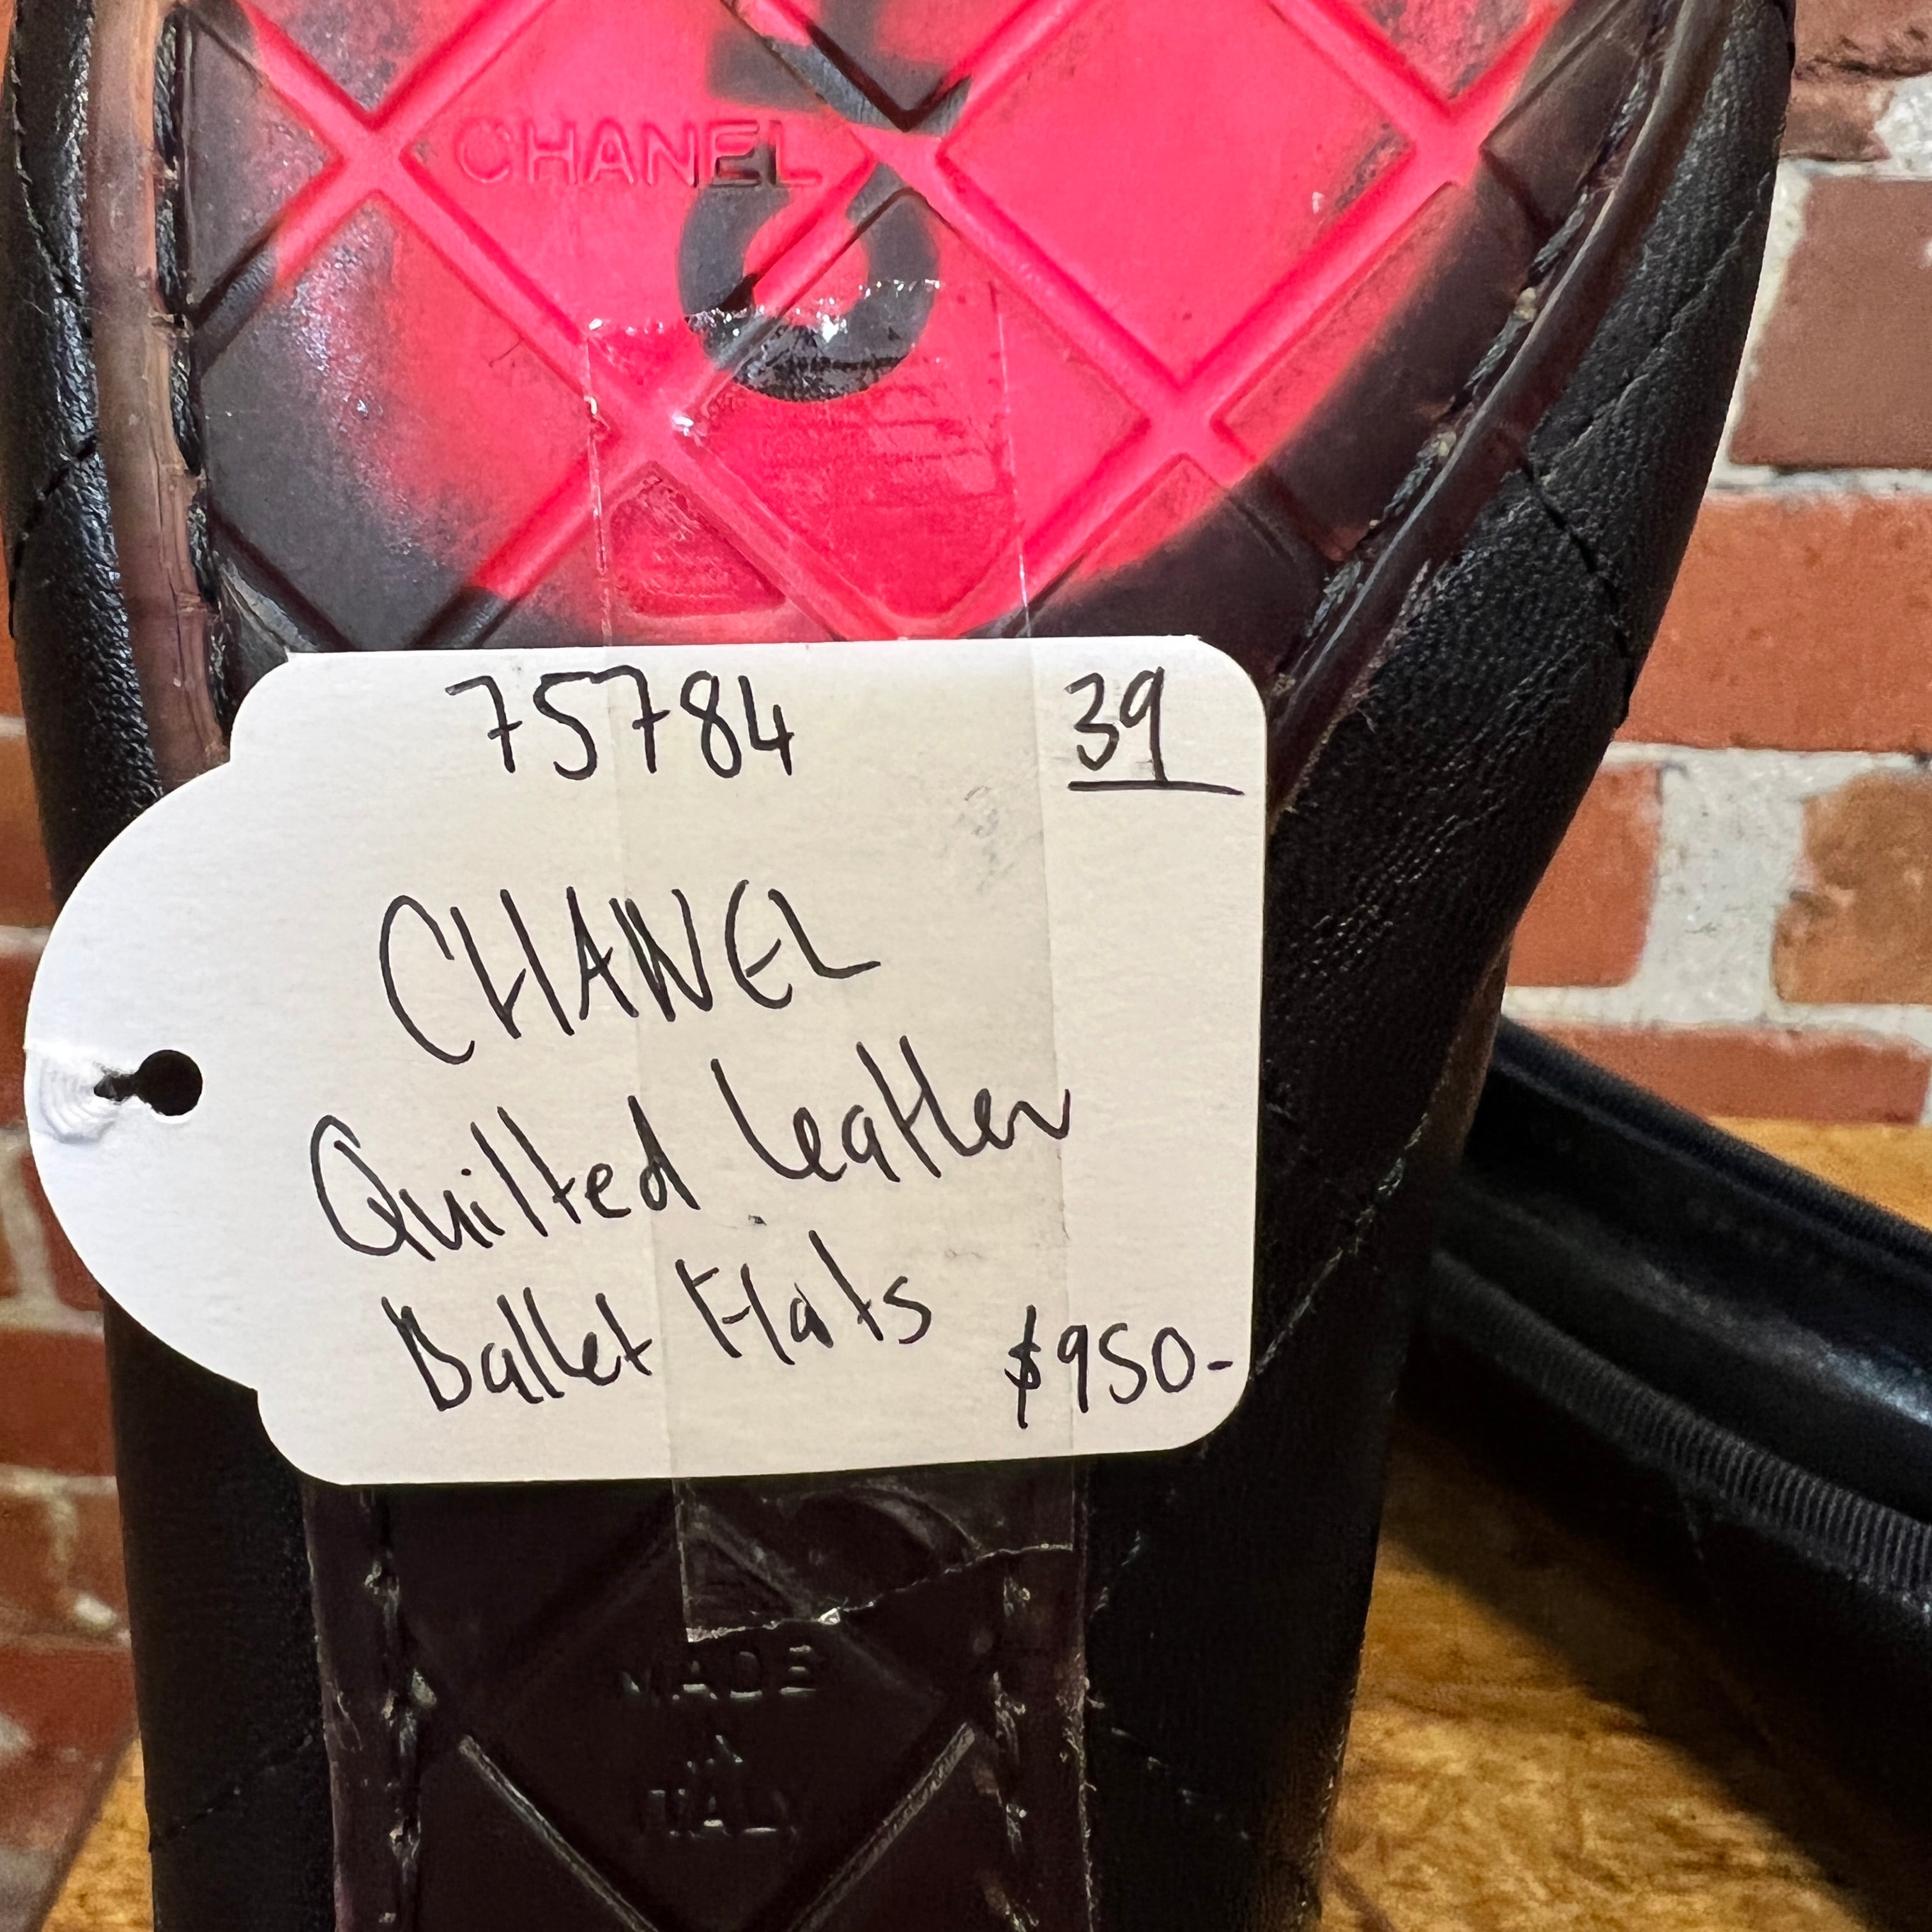 CHANEL Quilted leather ballet flats 39